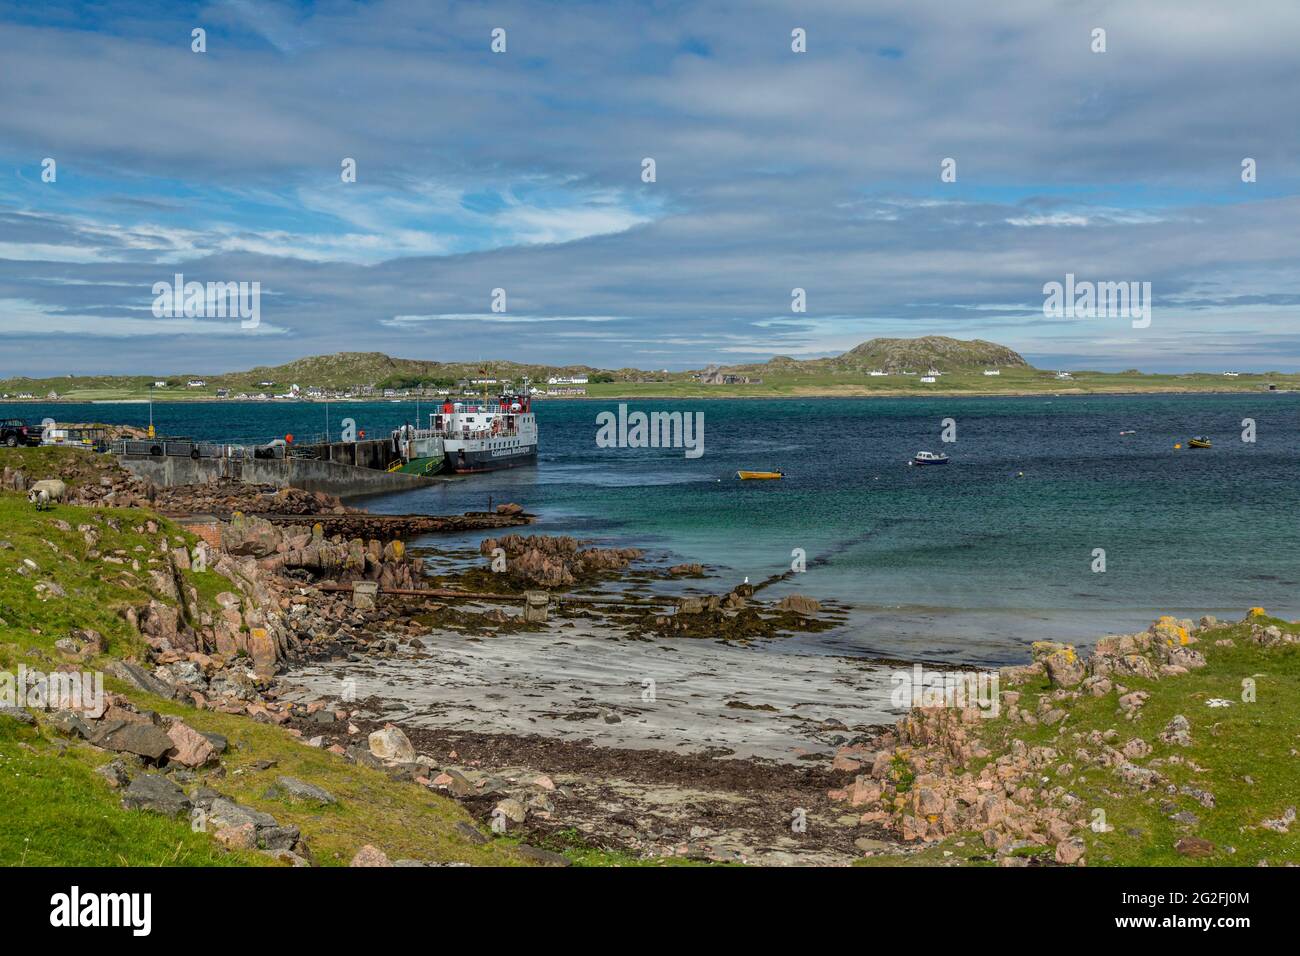 A Caledonian MacBrayne ferry at the Ferry Port, Fionnphort, on the Isle of Mull, Inner Hebrides, Scotland. The island of Iona in the distance. Stock Photo